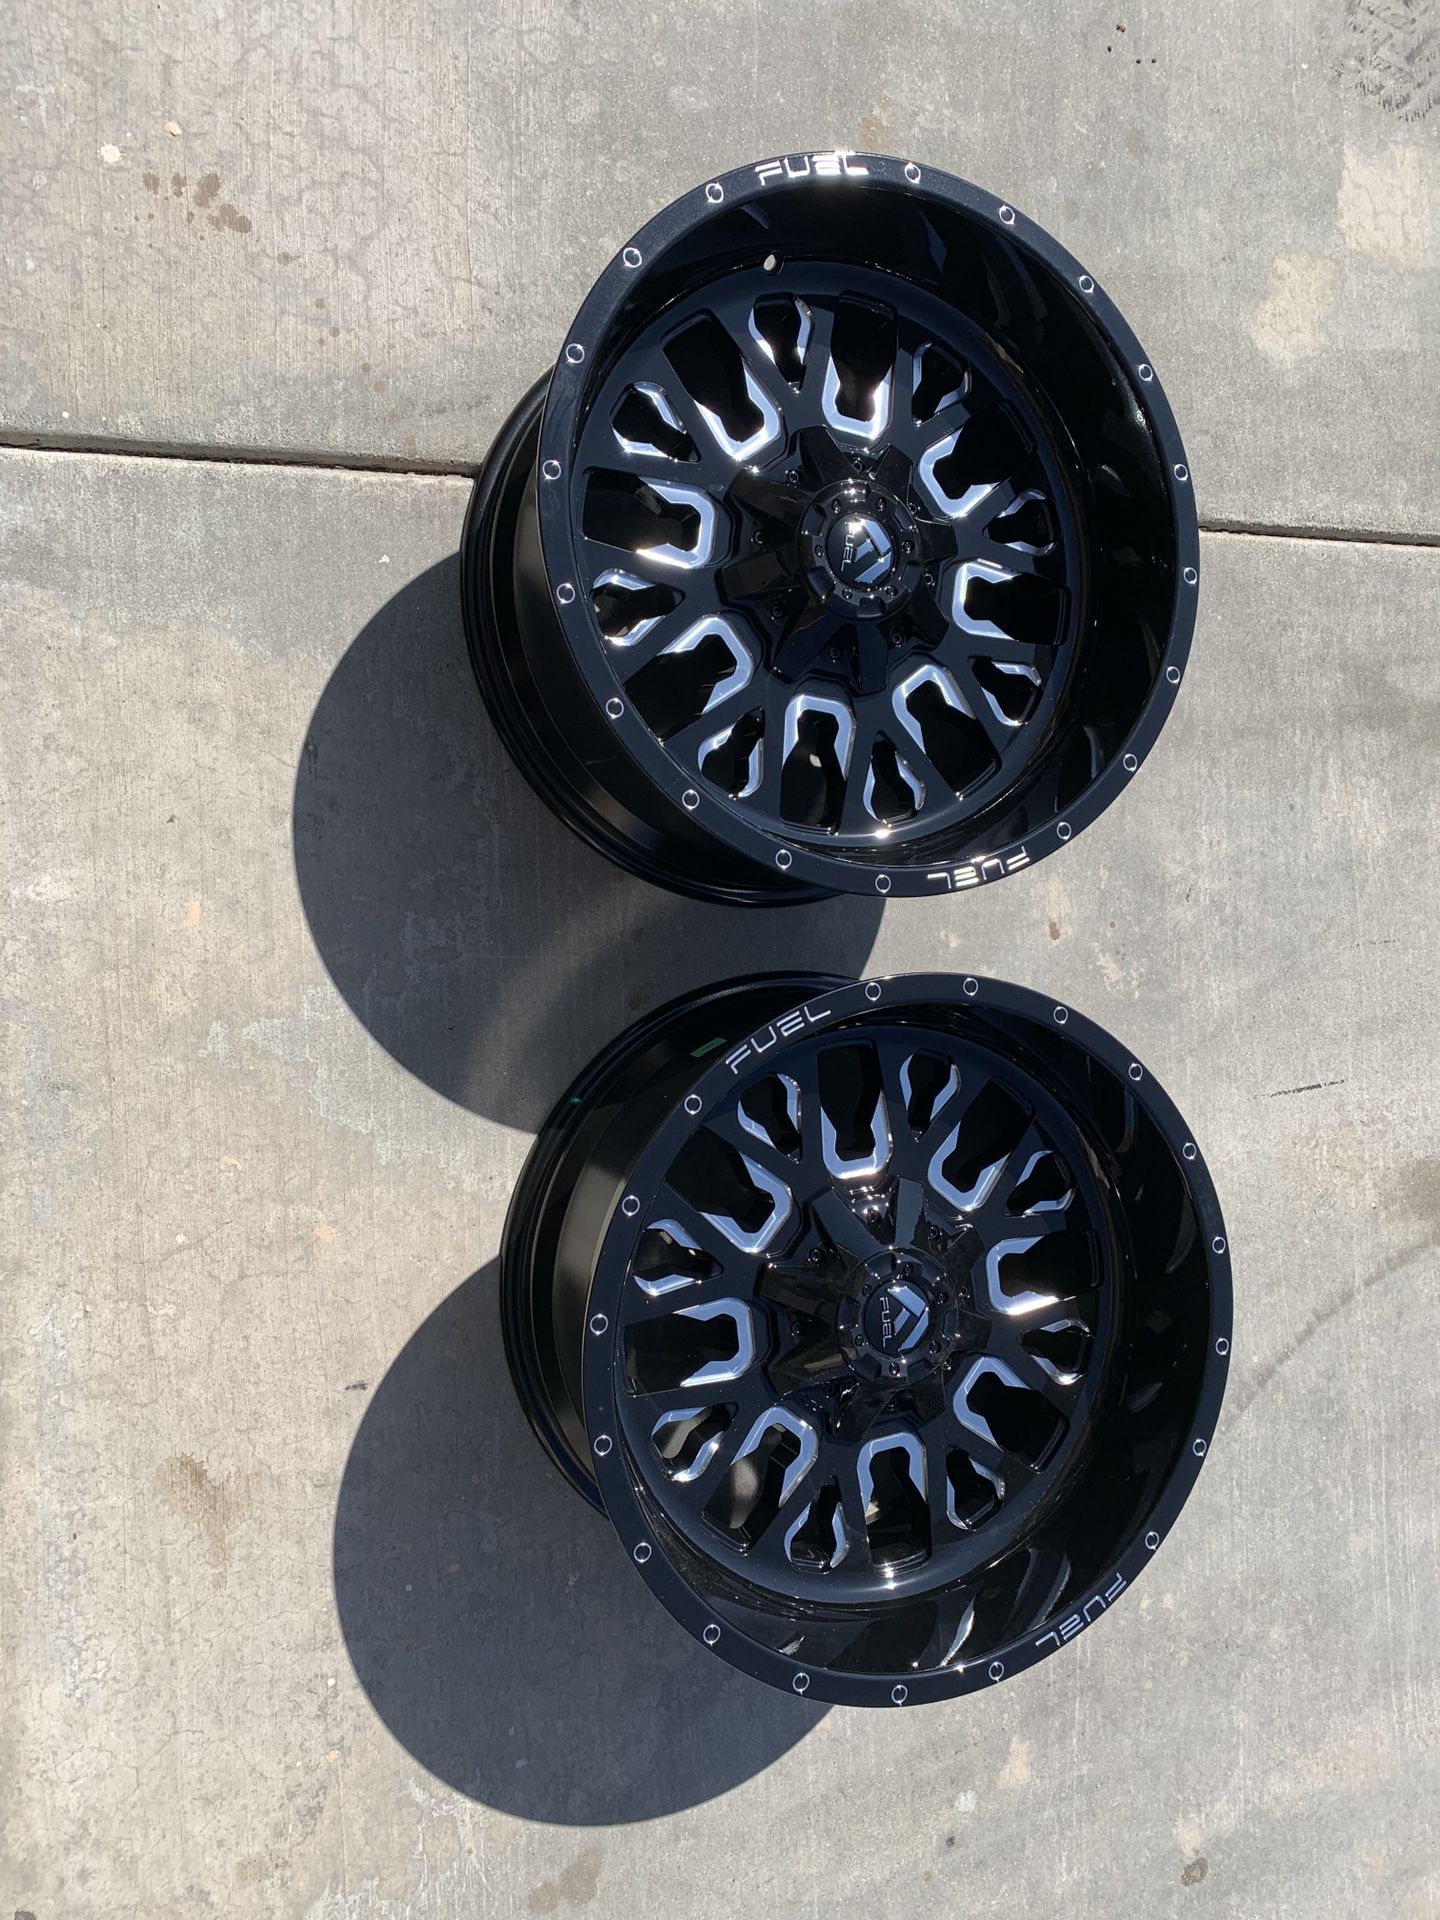 Two (2) Fuel D611 Stroke 20 x 10 Gloss Black Milled Off Road Rims